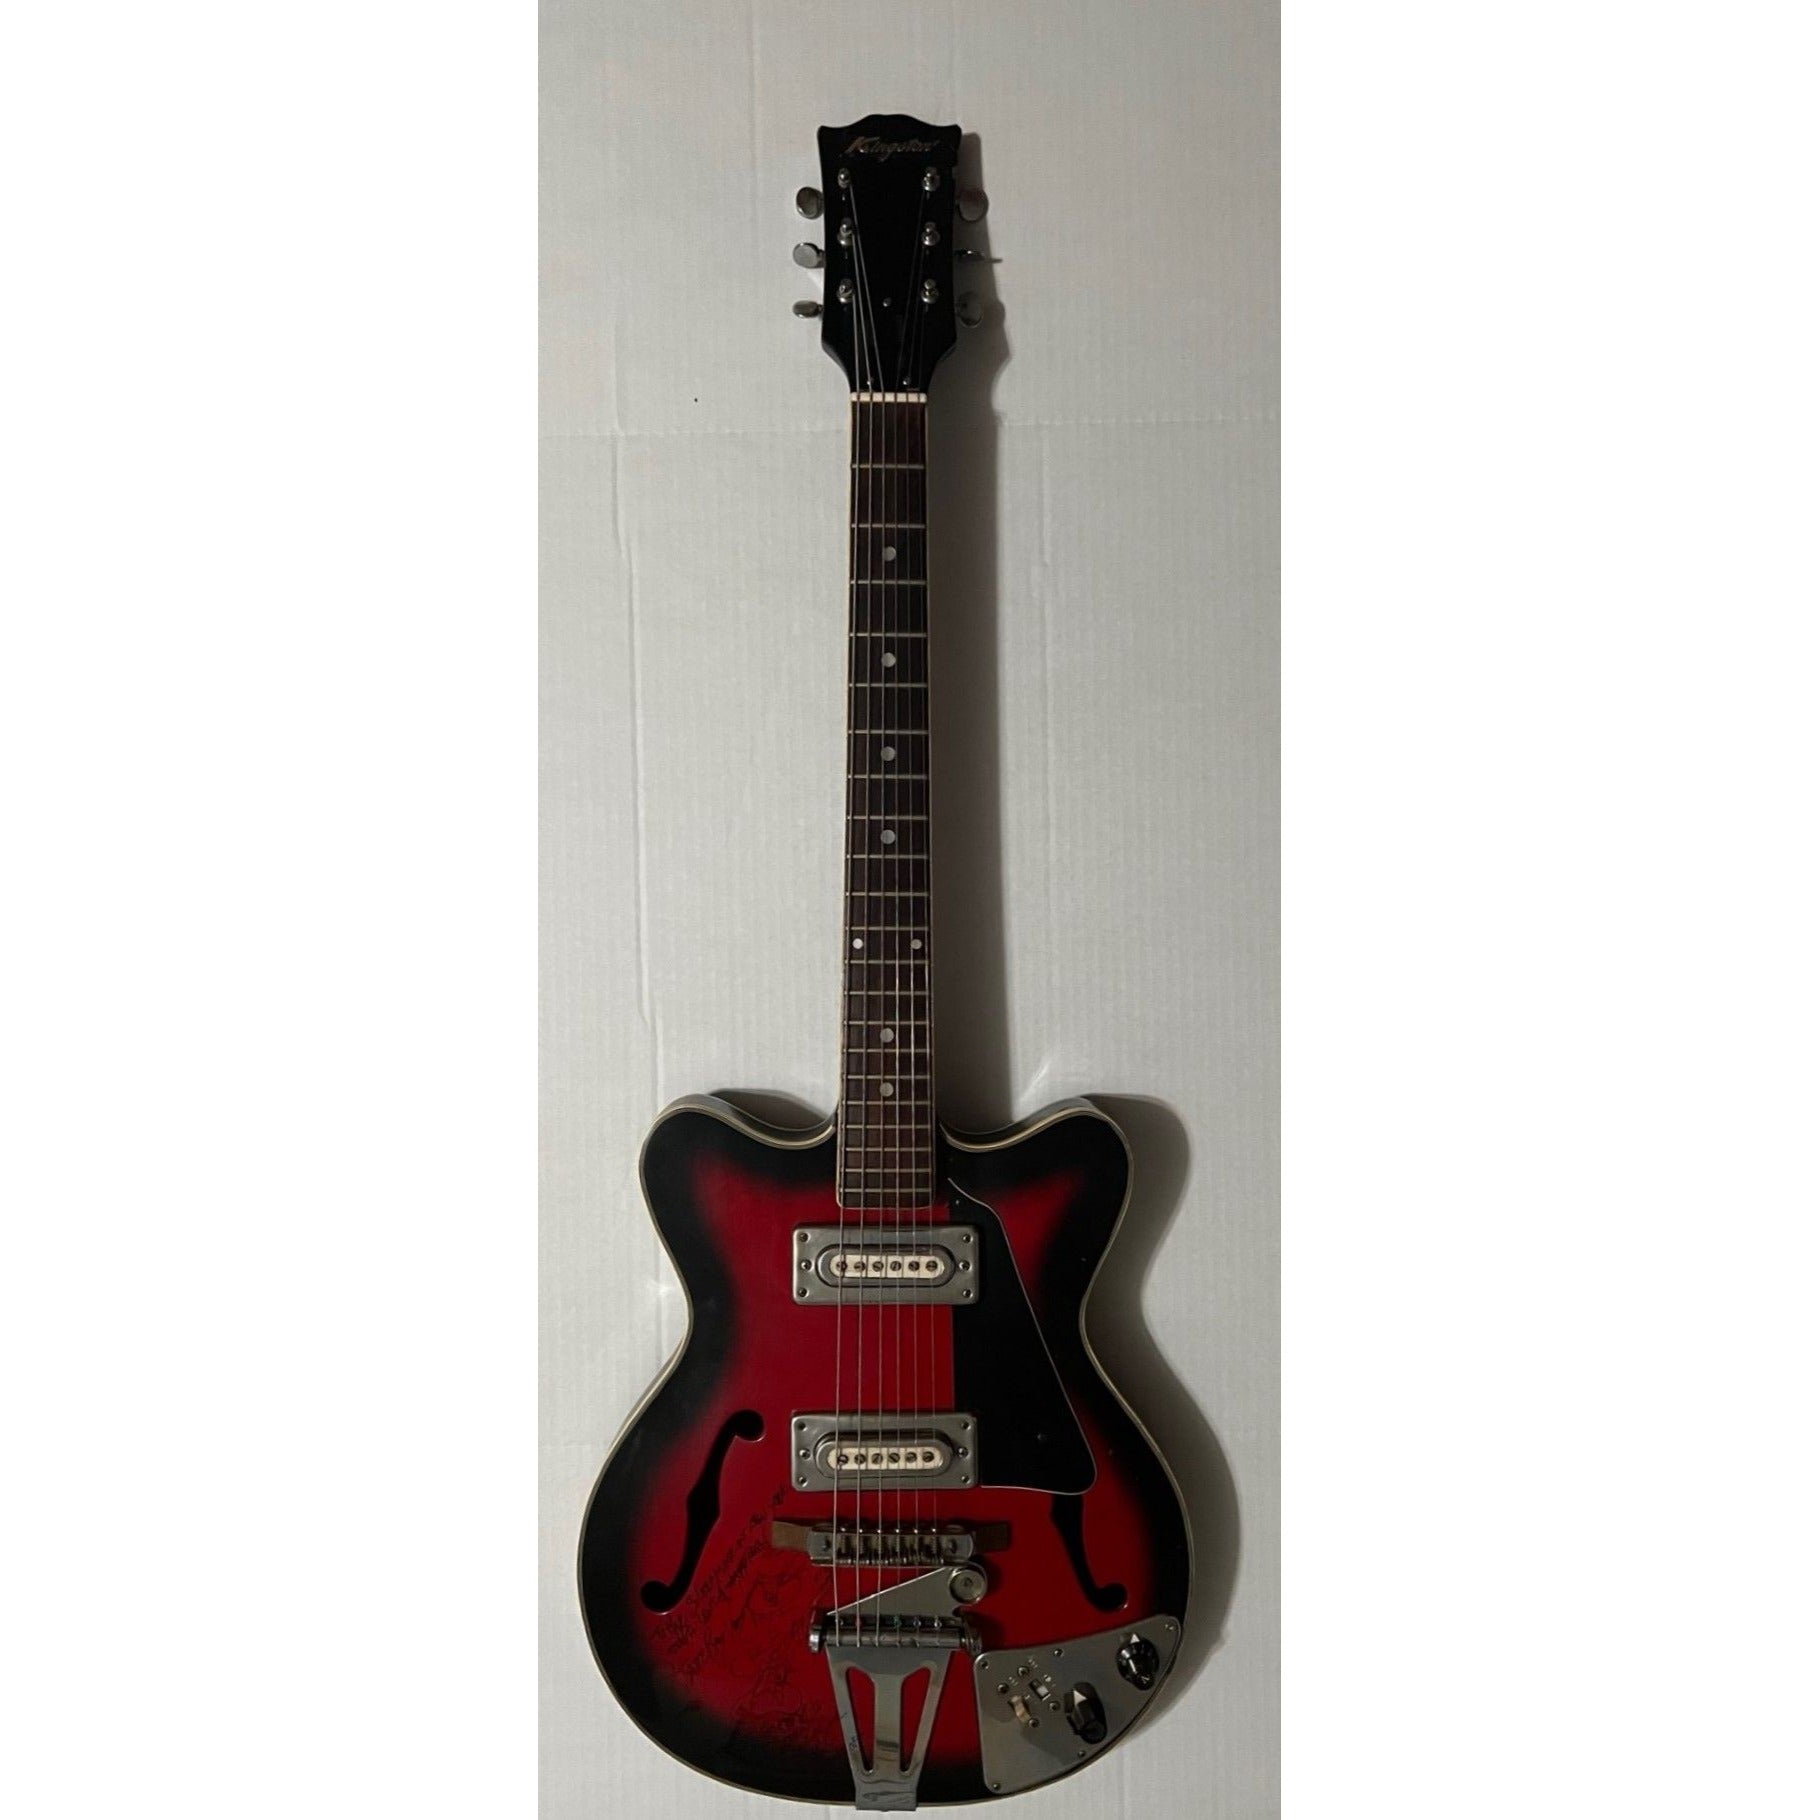 Stevie Ray Vaughan hollow body electric guitar signed with Sketch and inscription